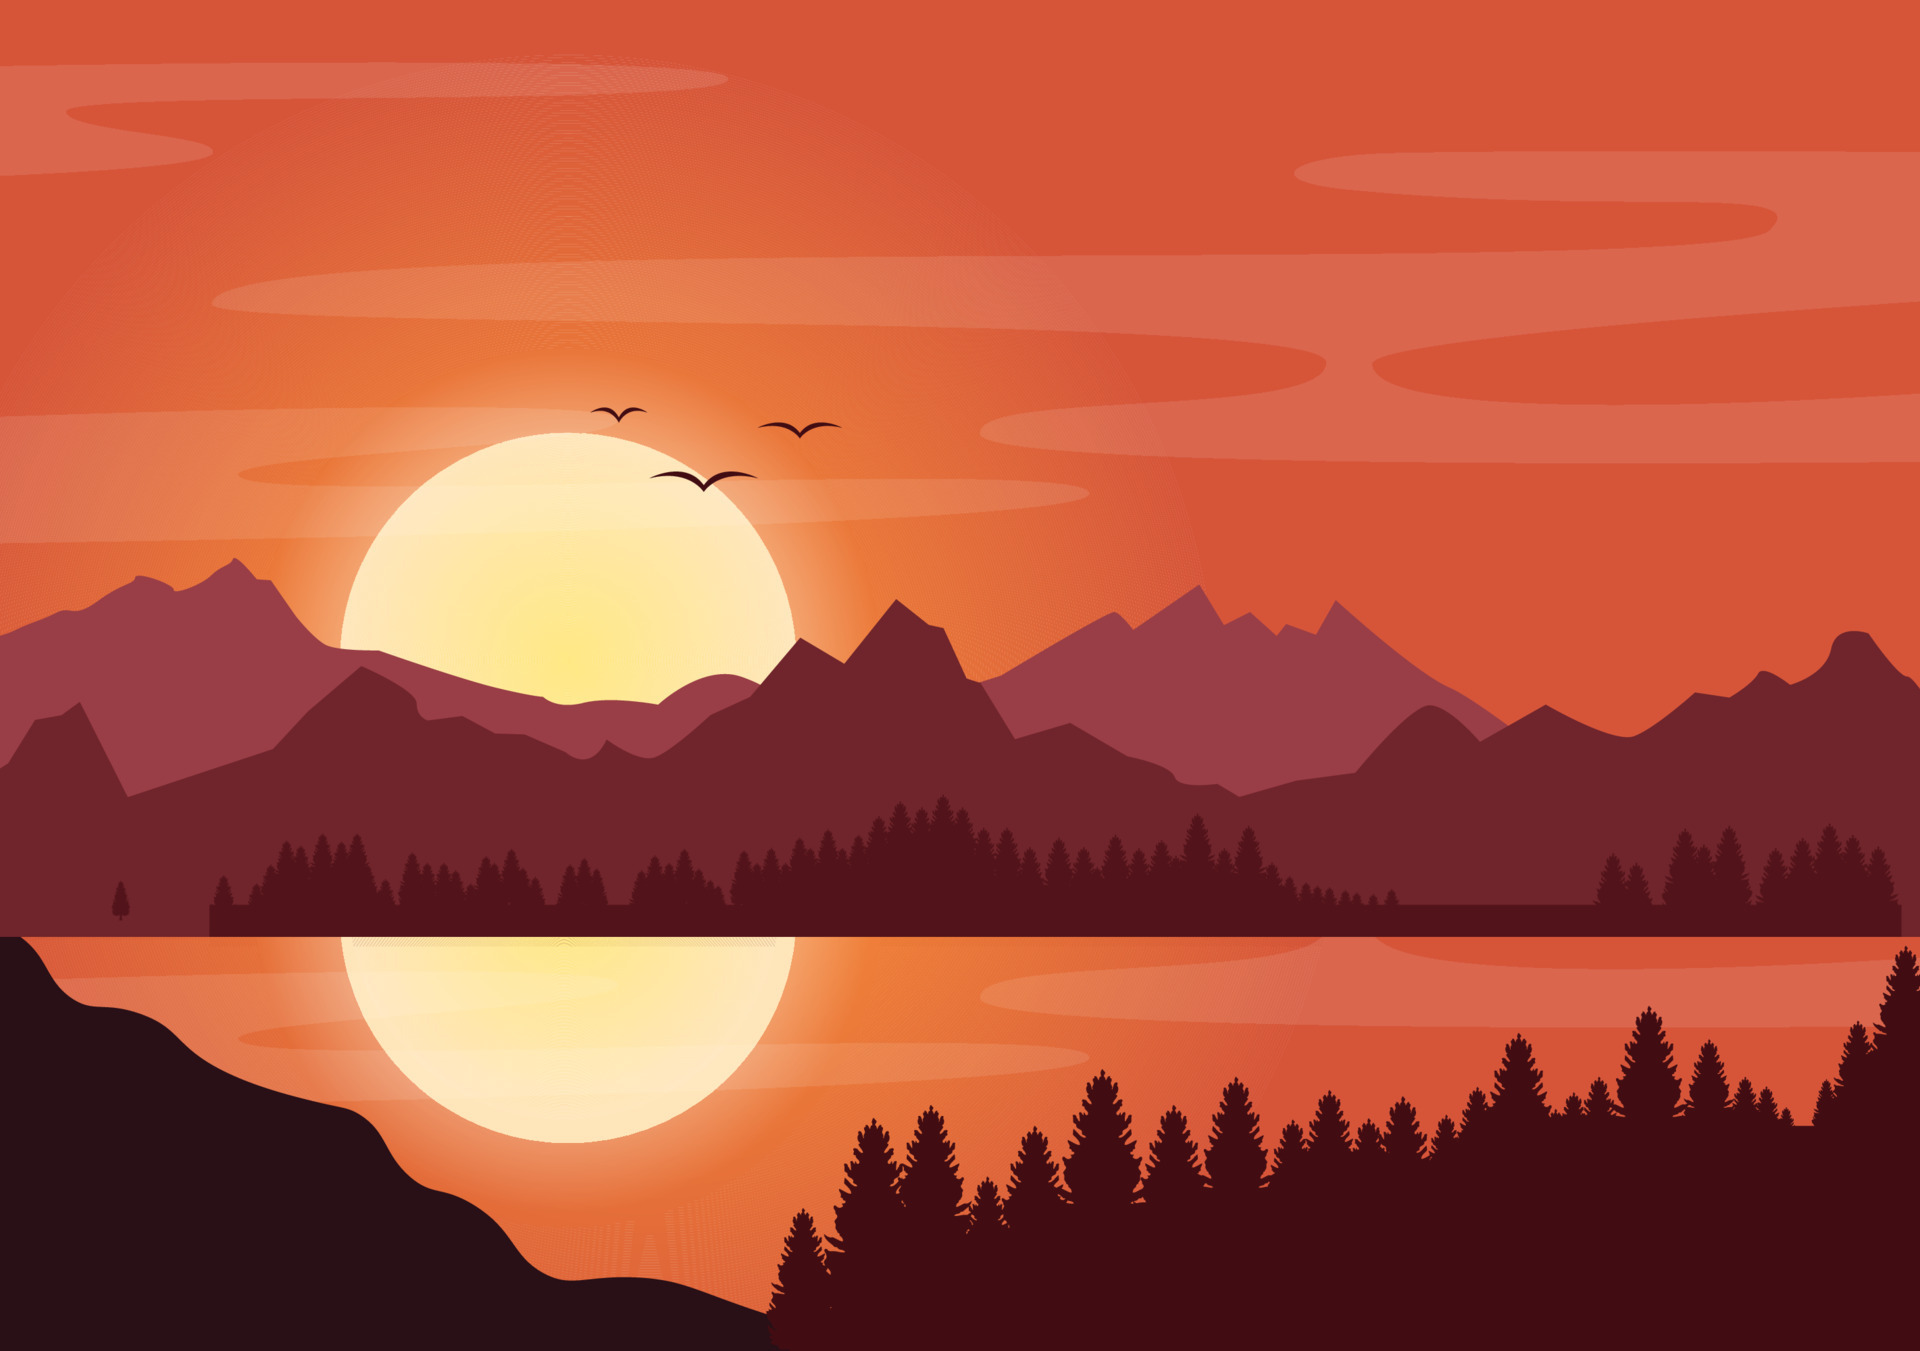 sunset-landscape-of-mountains-wilderness-sands-lake-and-valley-in-flat-wild-nature-for-poster-banner-or-background-illustration-vector